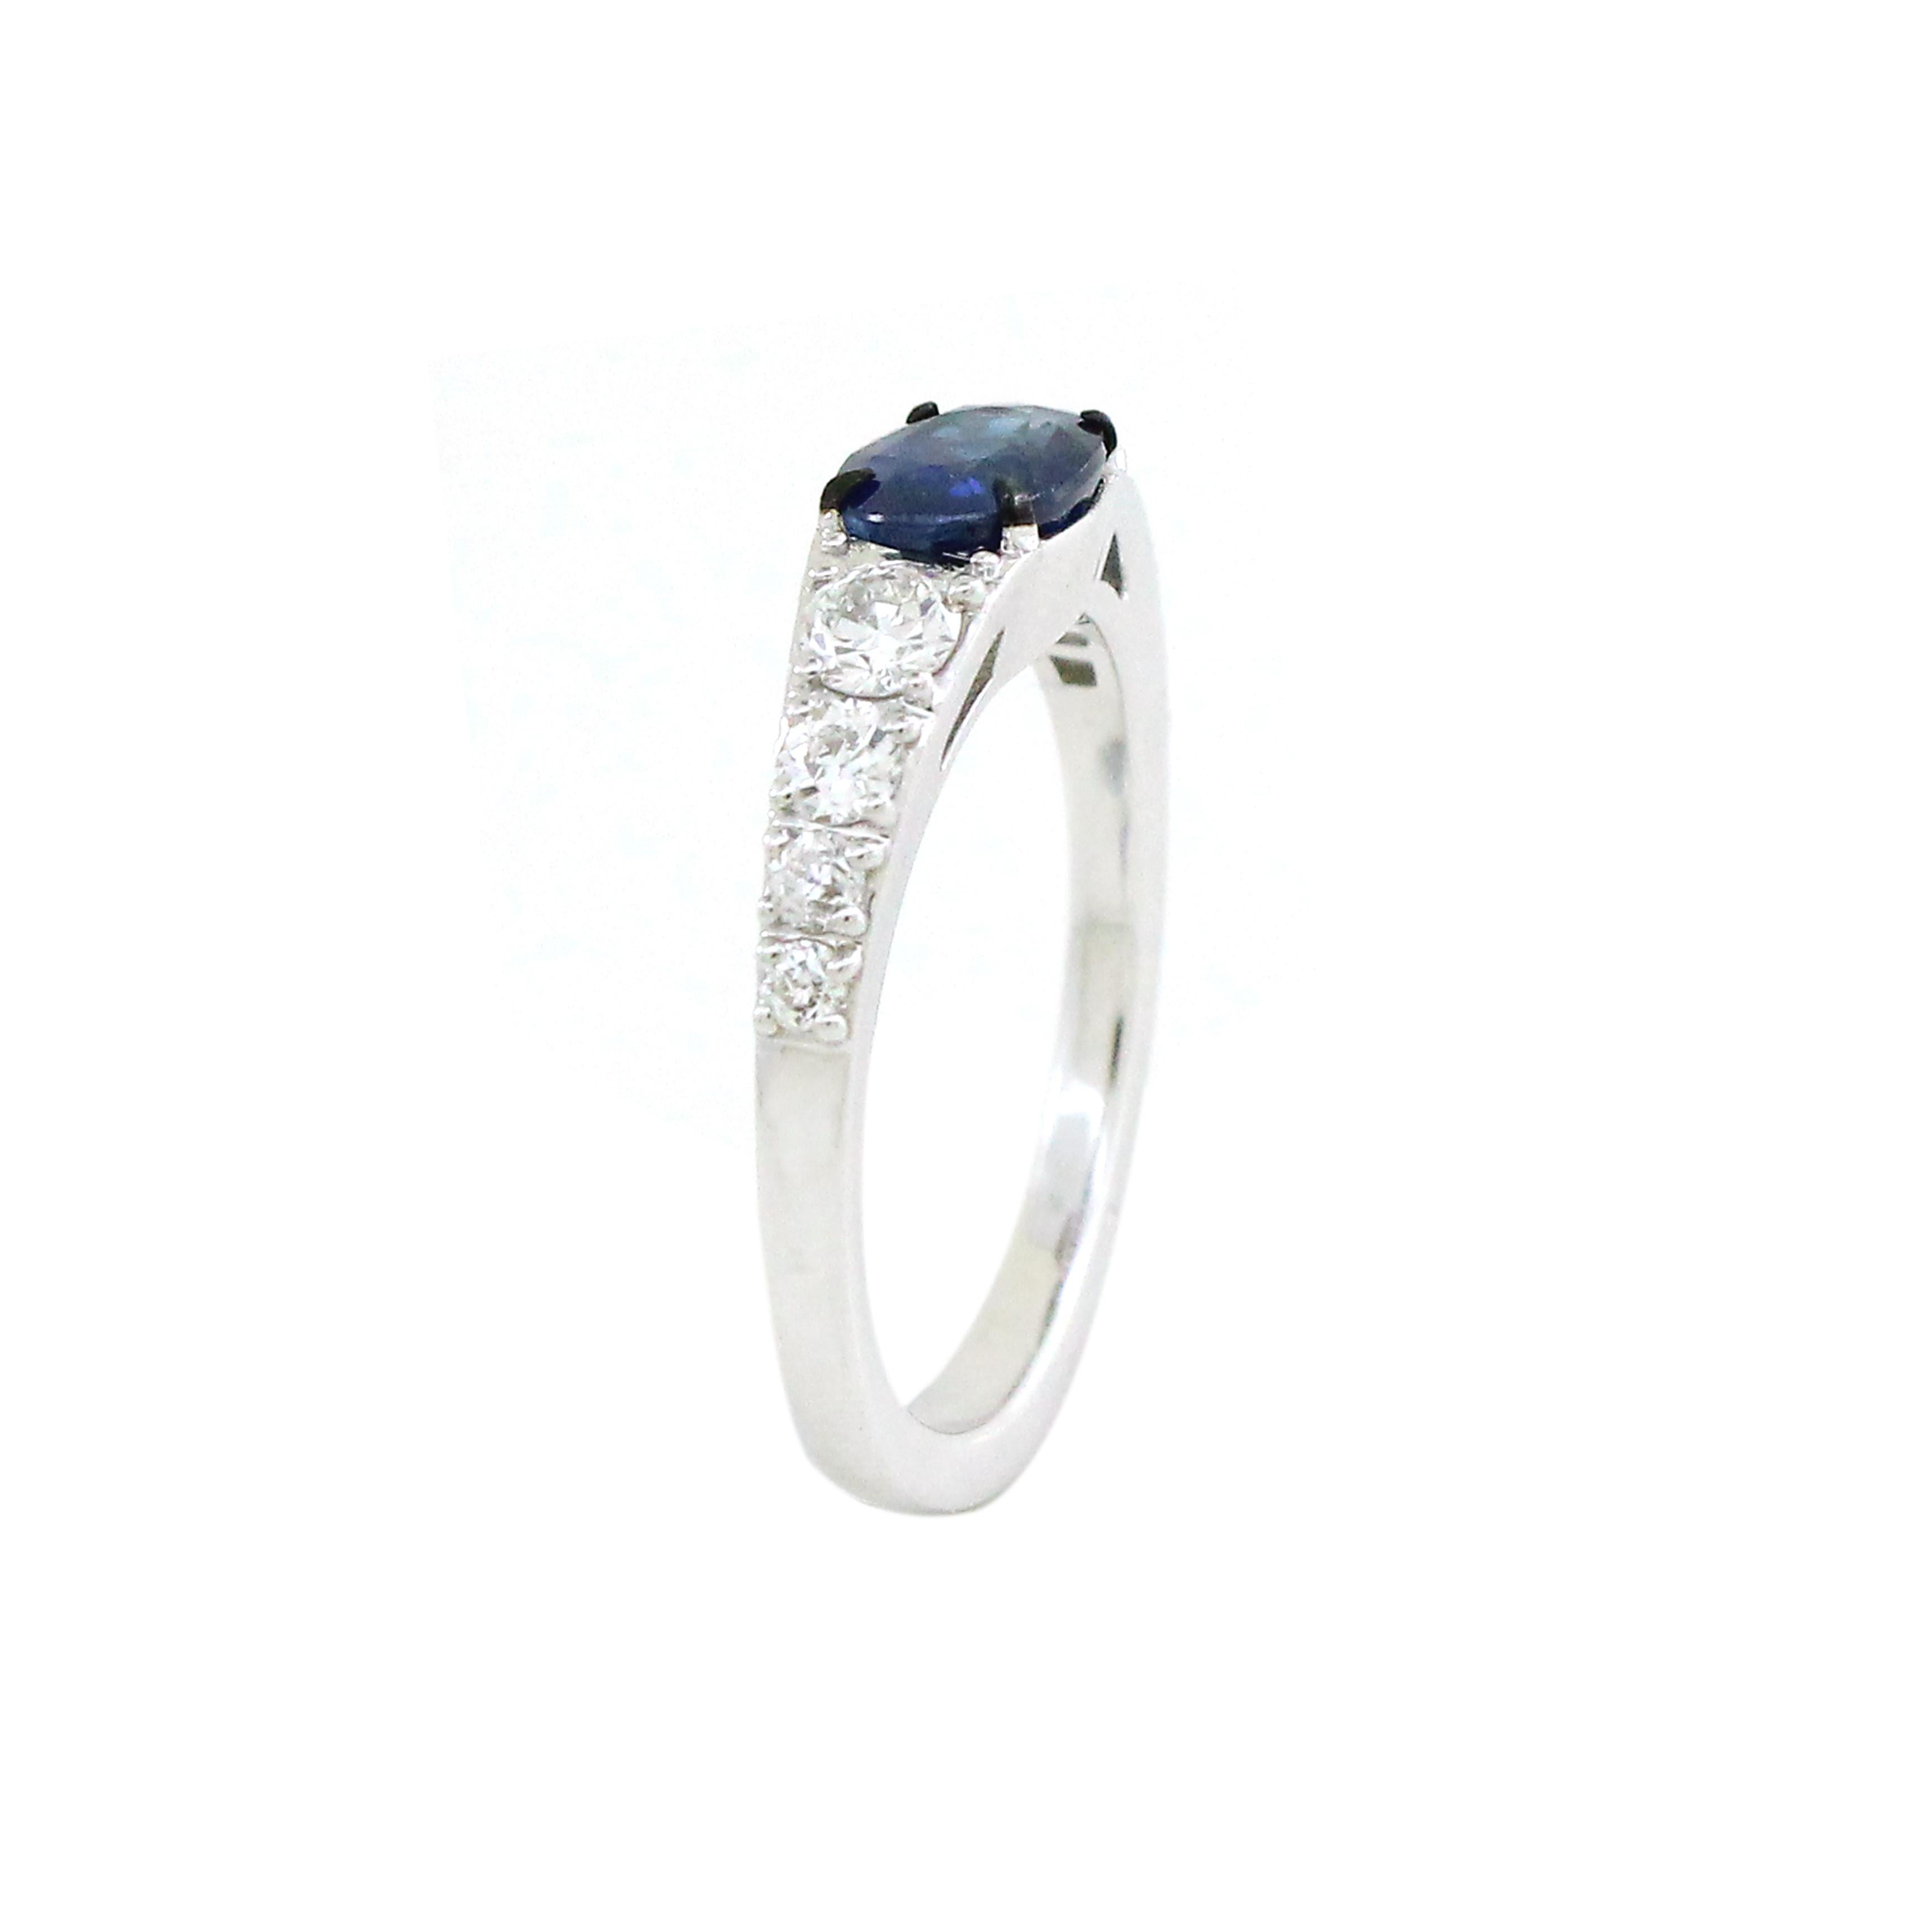 The focal point of this ring is a mesmerizing 1.24 carat oval cut sapphire, carefully selected for its exceptional color and clarity. Its deep, velvety blue hue evokes a sense of timeless allure, while the sapphire's graceful oval shape adds a touch